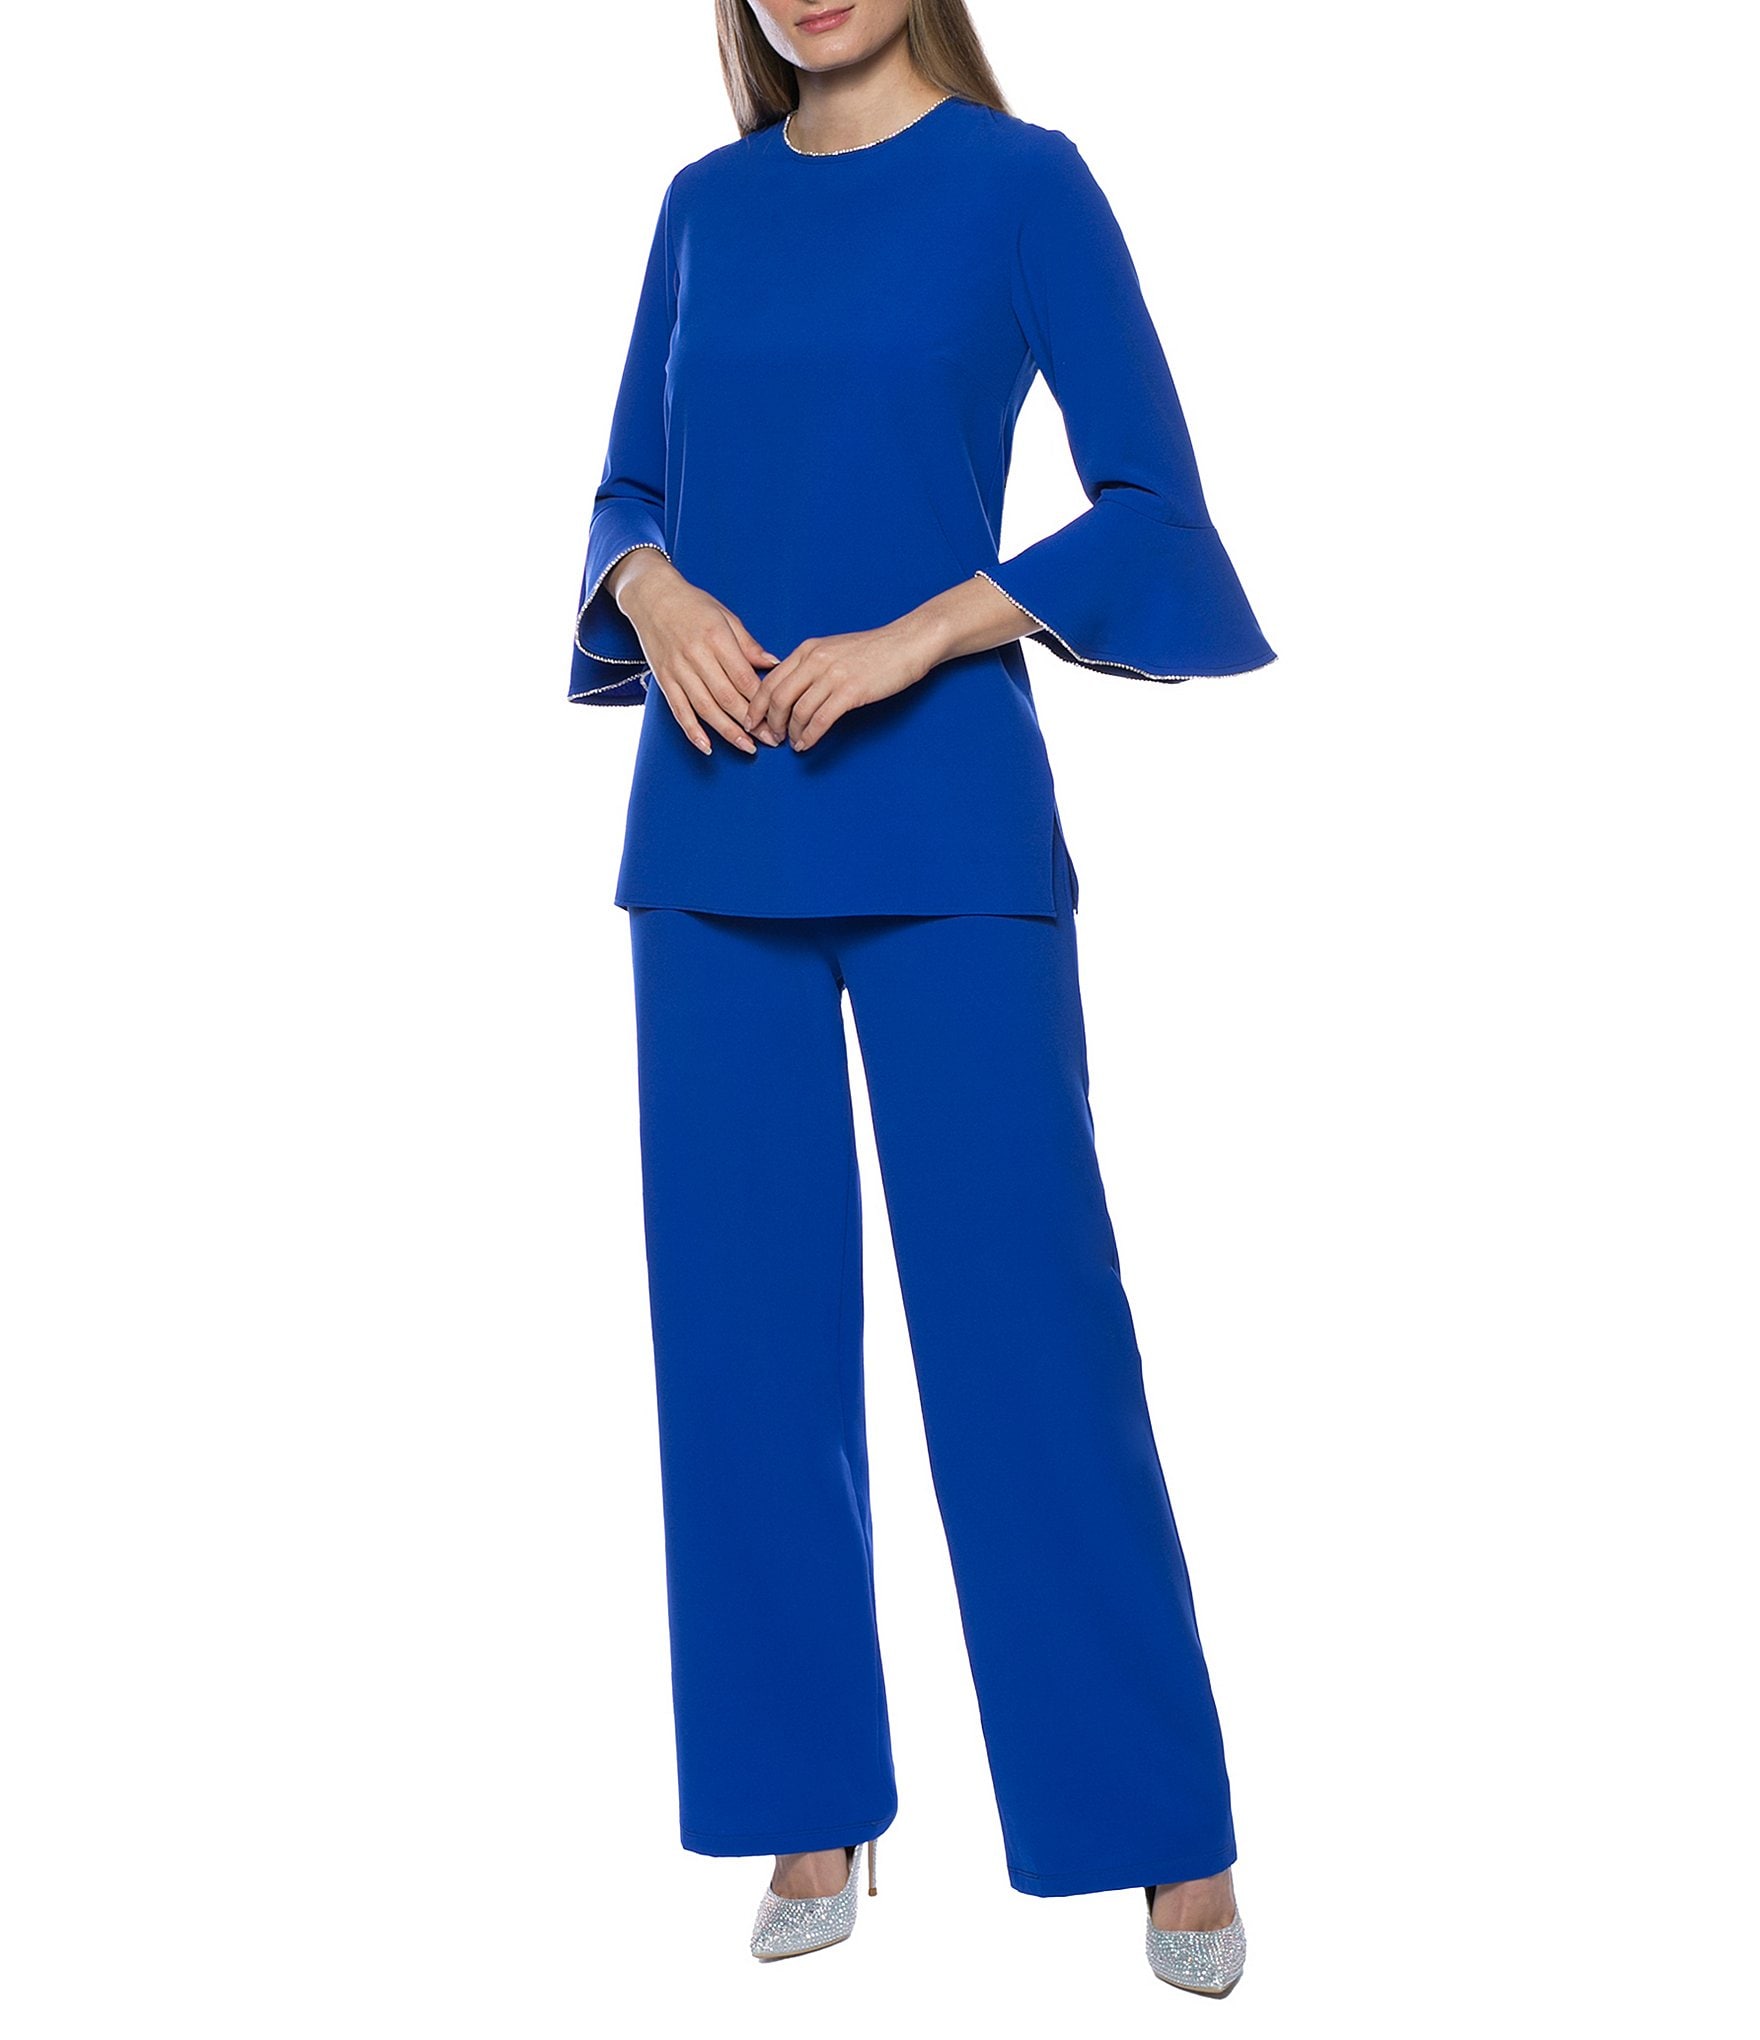 Spring Royal Blue Women Pants Suits For Wedding Mother of the Bride Suit  Ladies Evening Party Tuxedos Formal Wear 2 Pcs2618